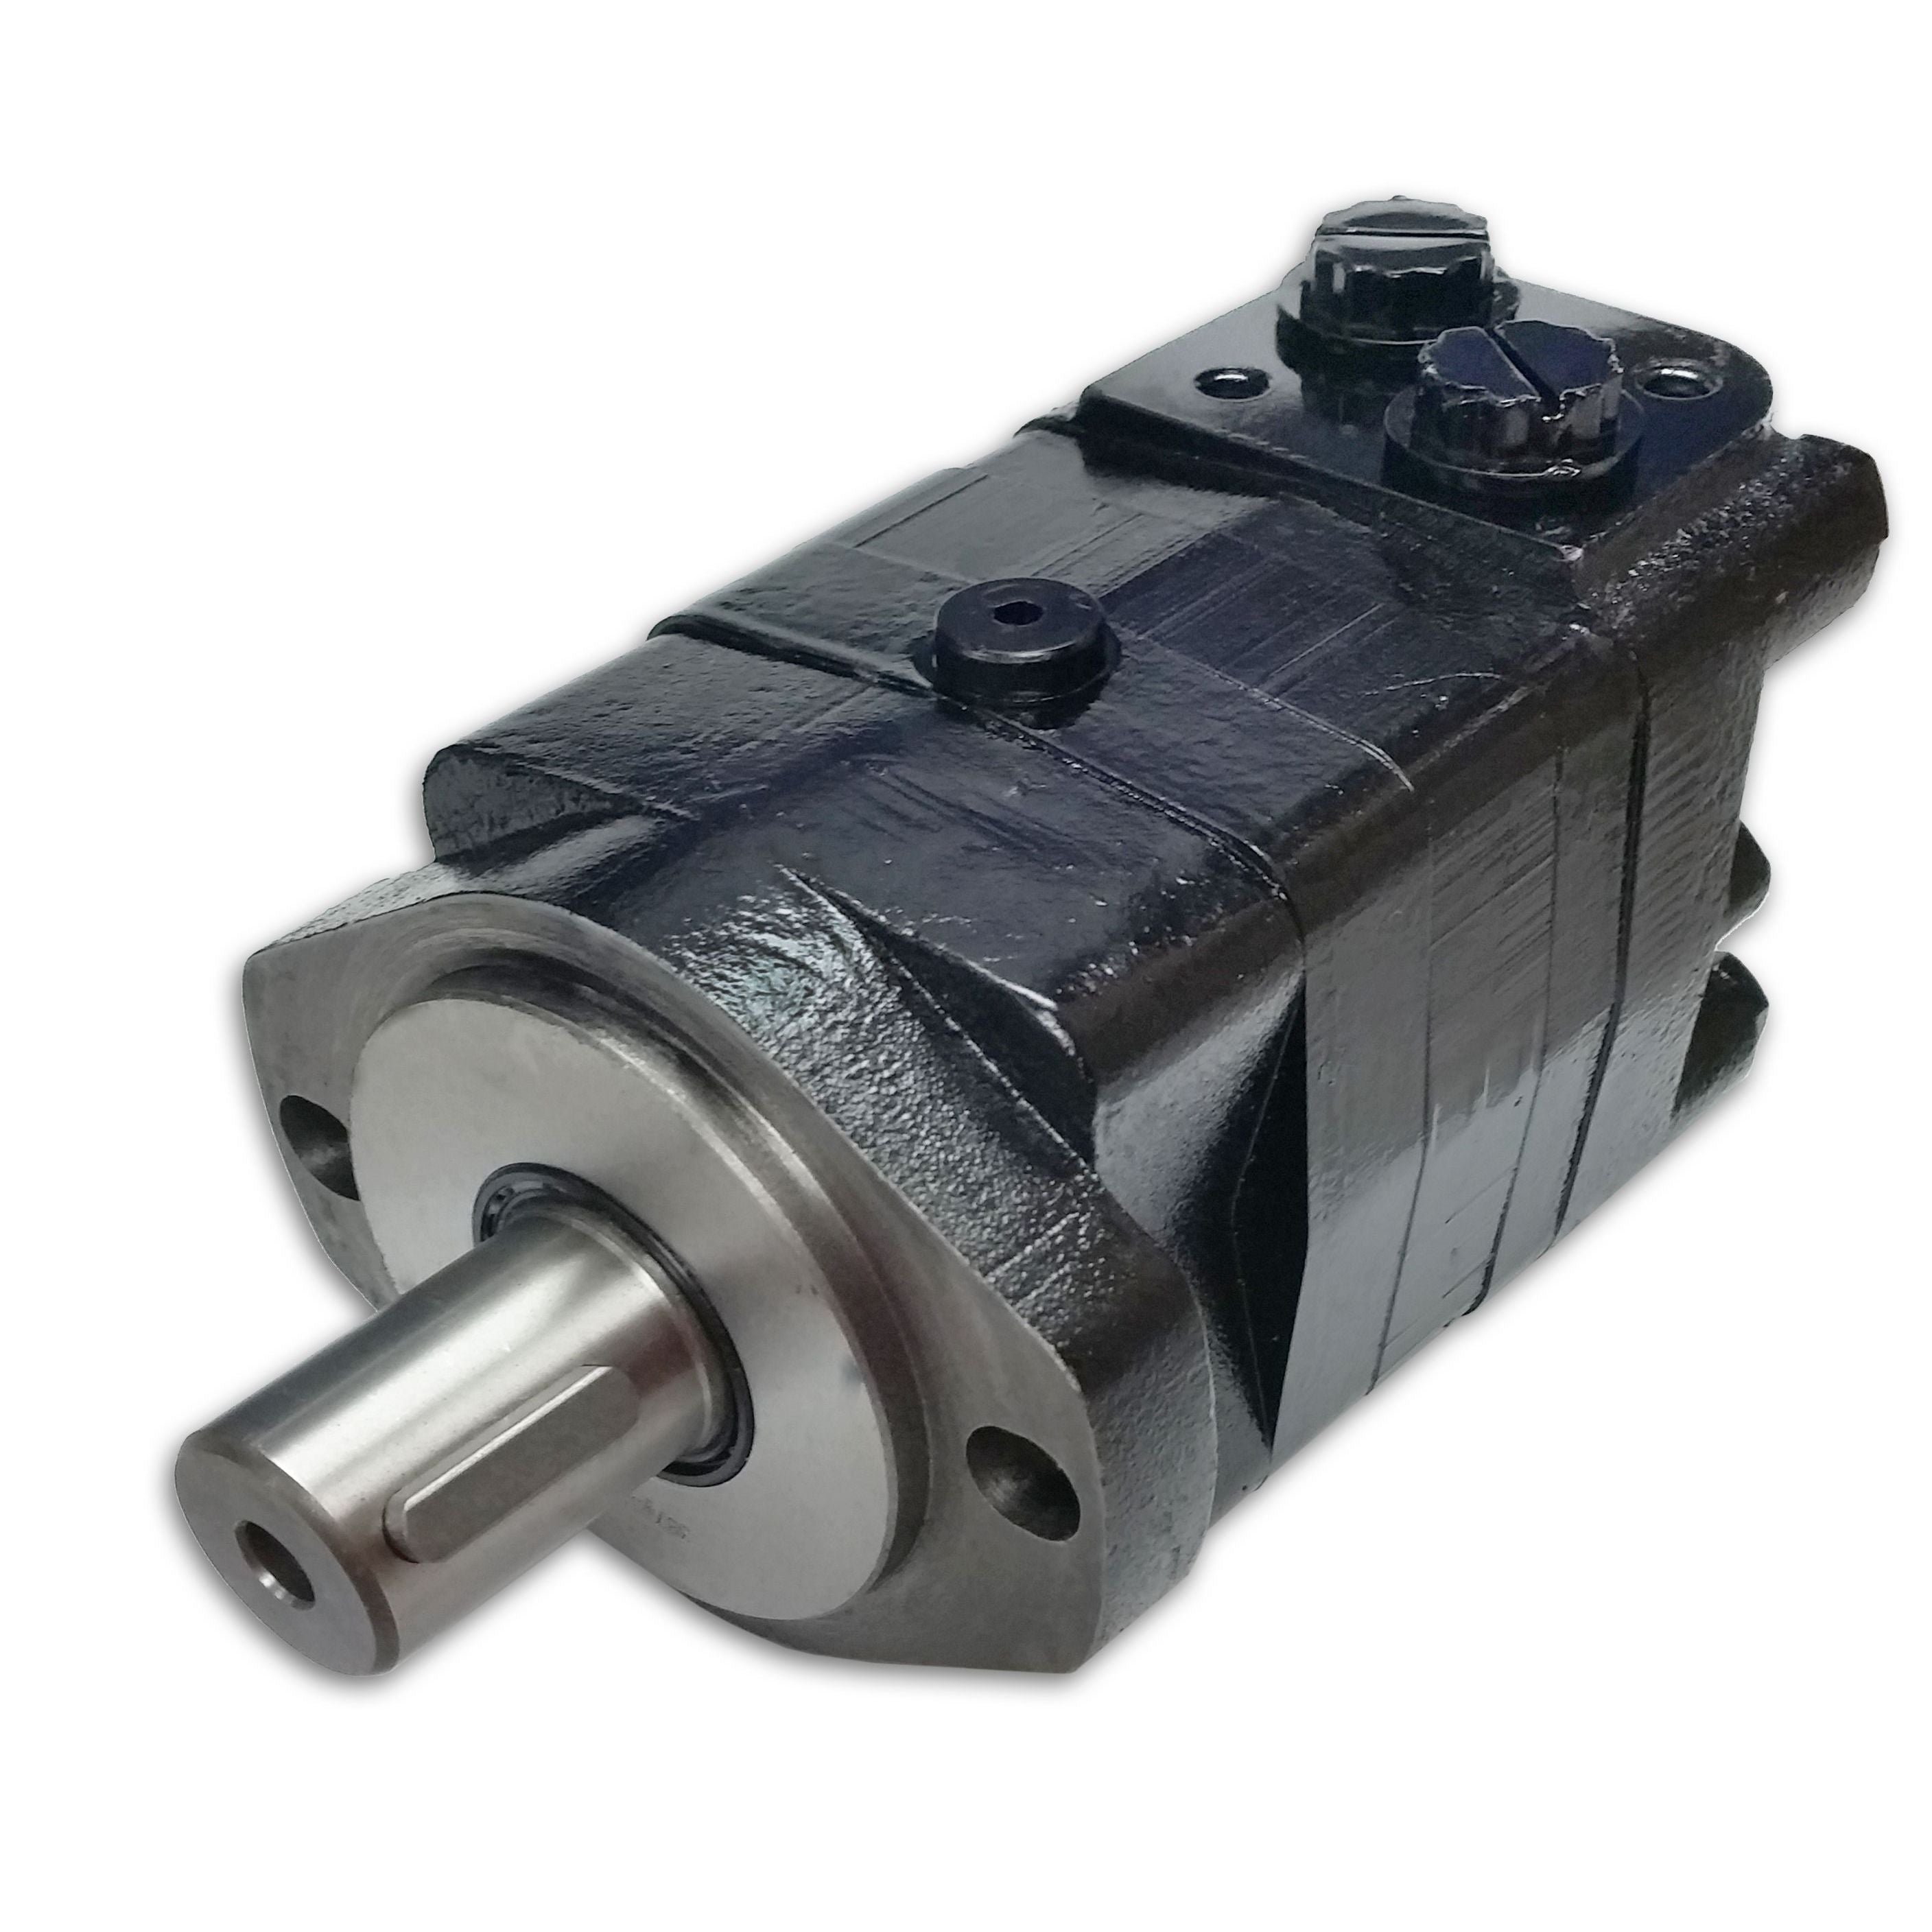 BMSY-315-E2-G-S : Dynamic LSHT Motor, 311cc, 240RPM, 7787in-lb, 2900psi Differential, 19.81GPM, SAE A 2-Bolt Mount, 1.25" Bore x 5/16" Key Shaft, Side Ported, #10 SAE (5/8")